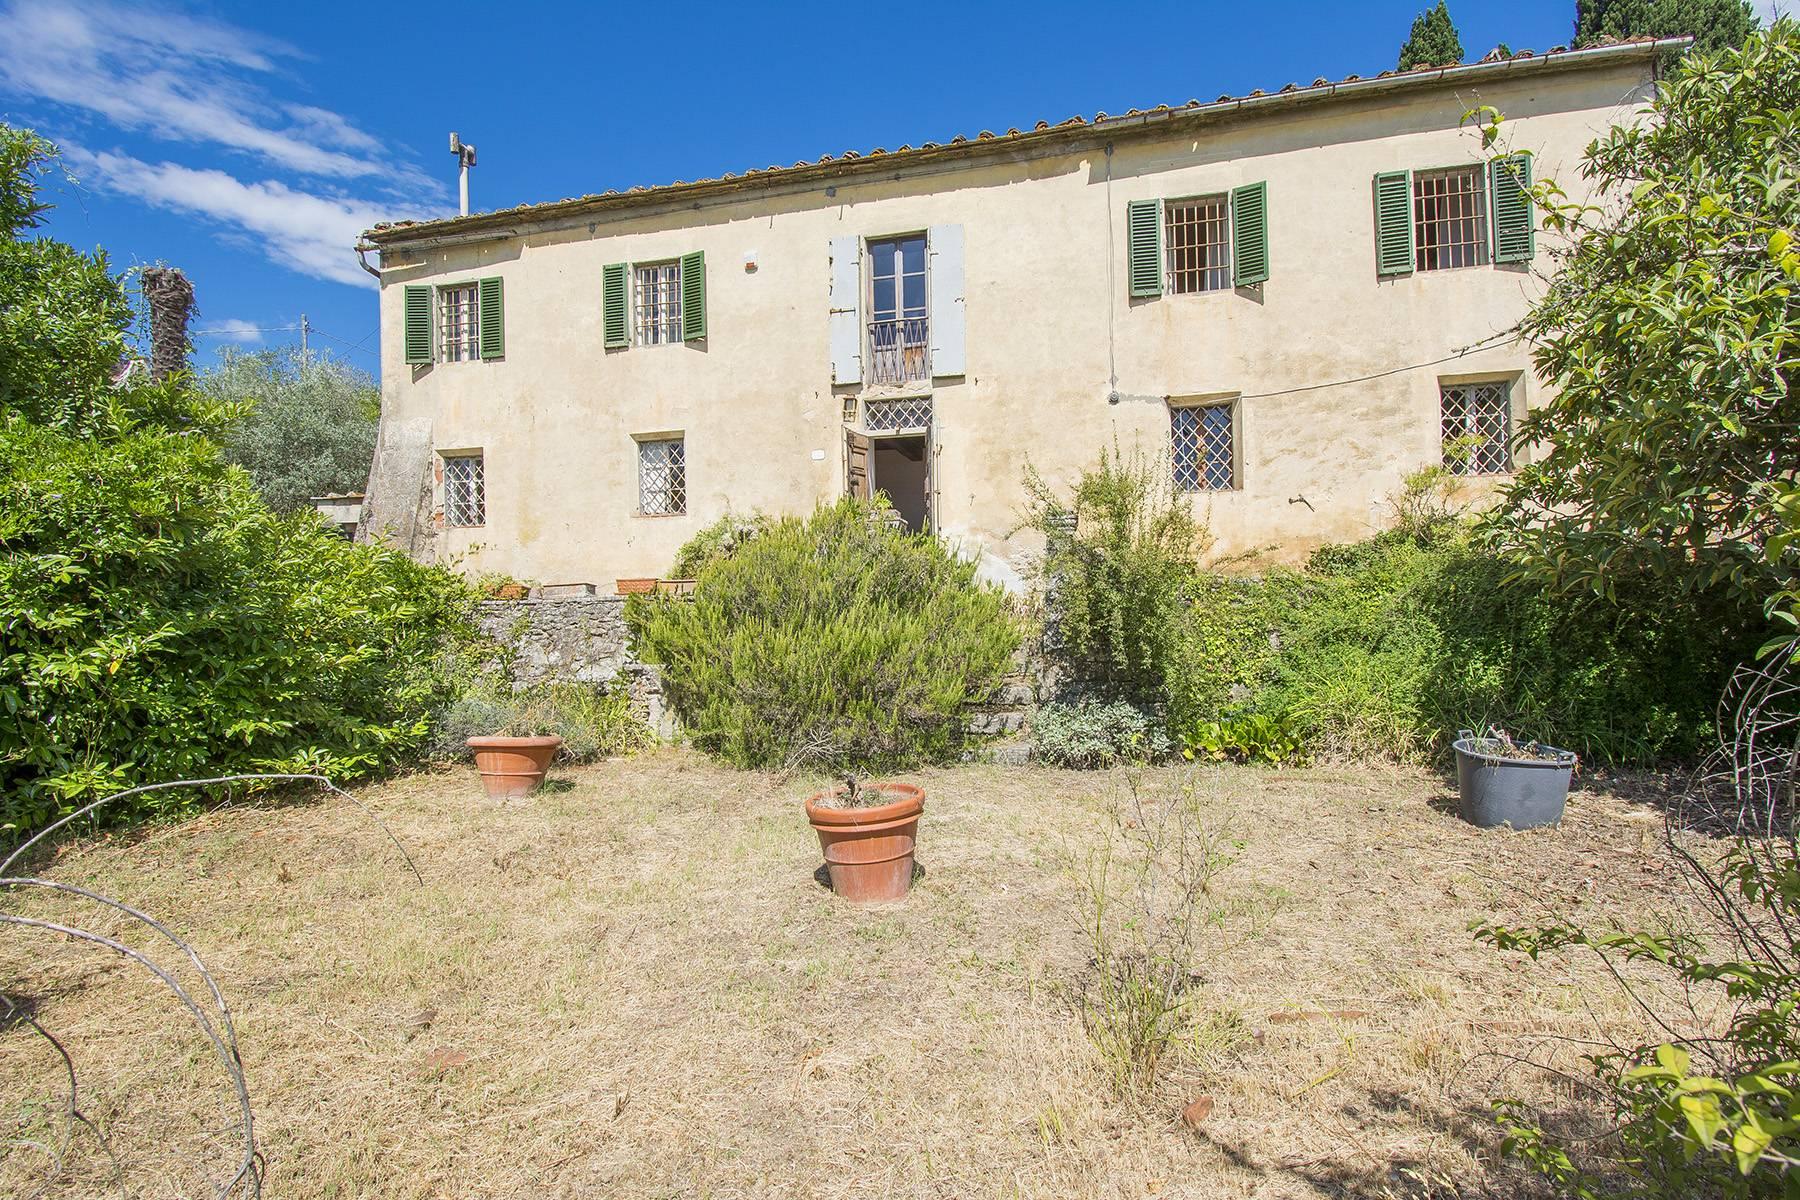 Charming farmhouse with a Xth century parish church in the Pistoia countryside - 5